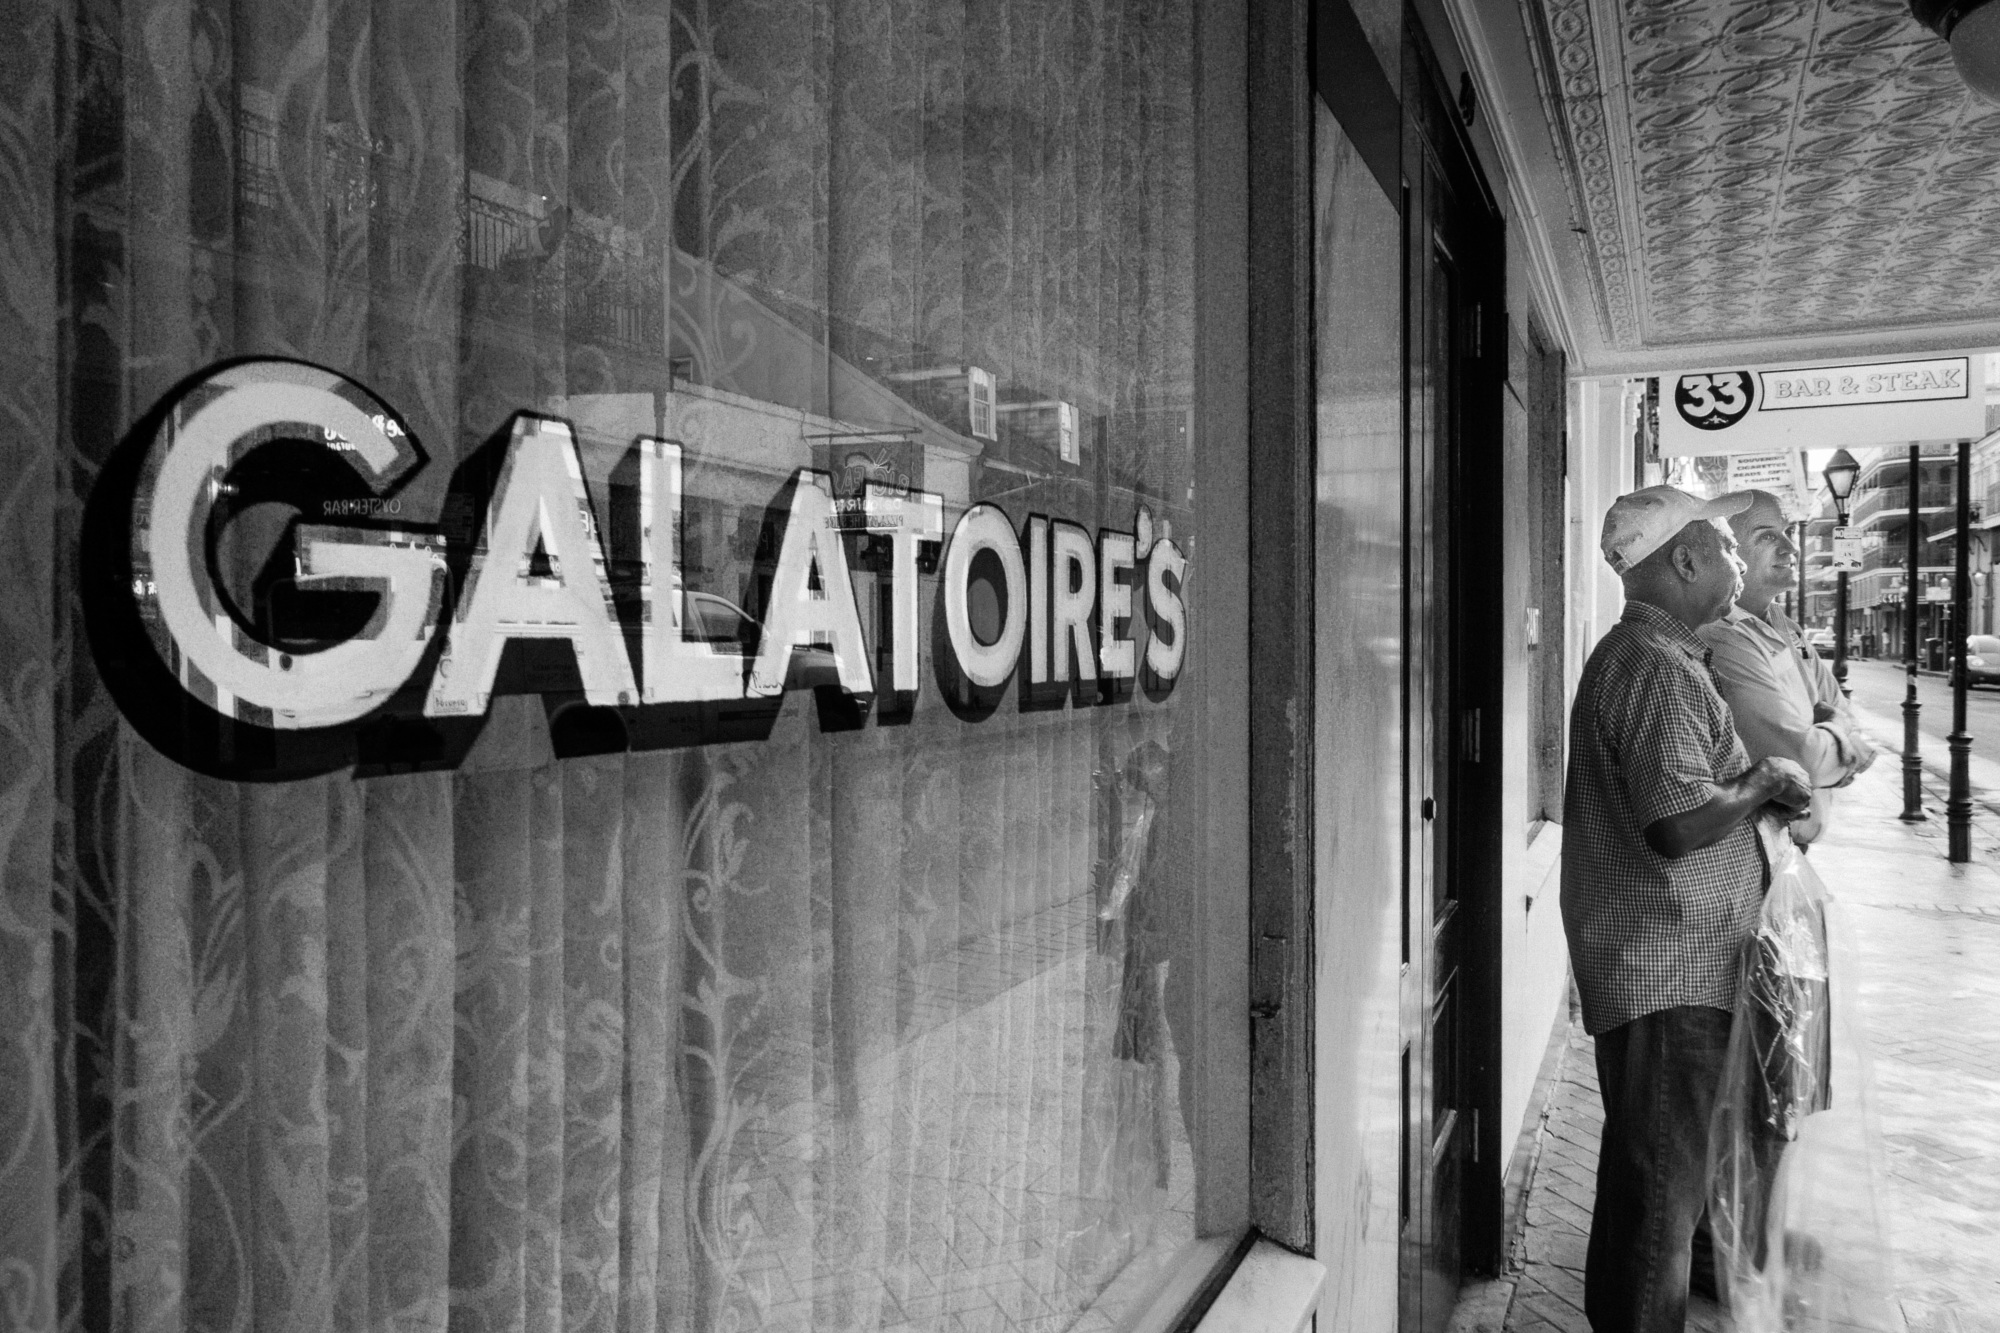 "Friday lunch at Galatoire’s is ritual and reunion." // Photo: Erik Pronske / Getty Images